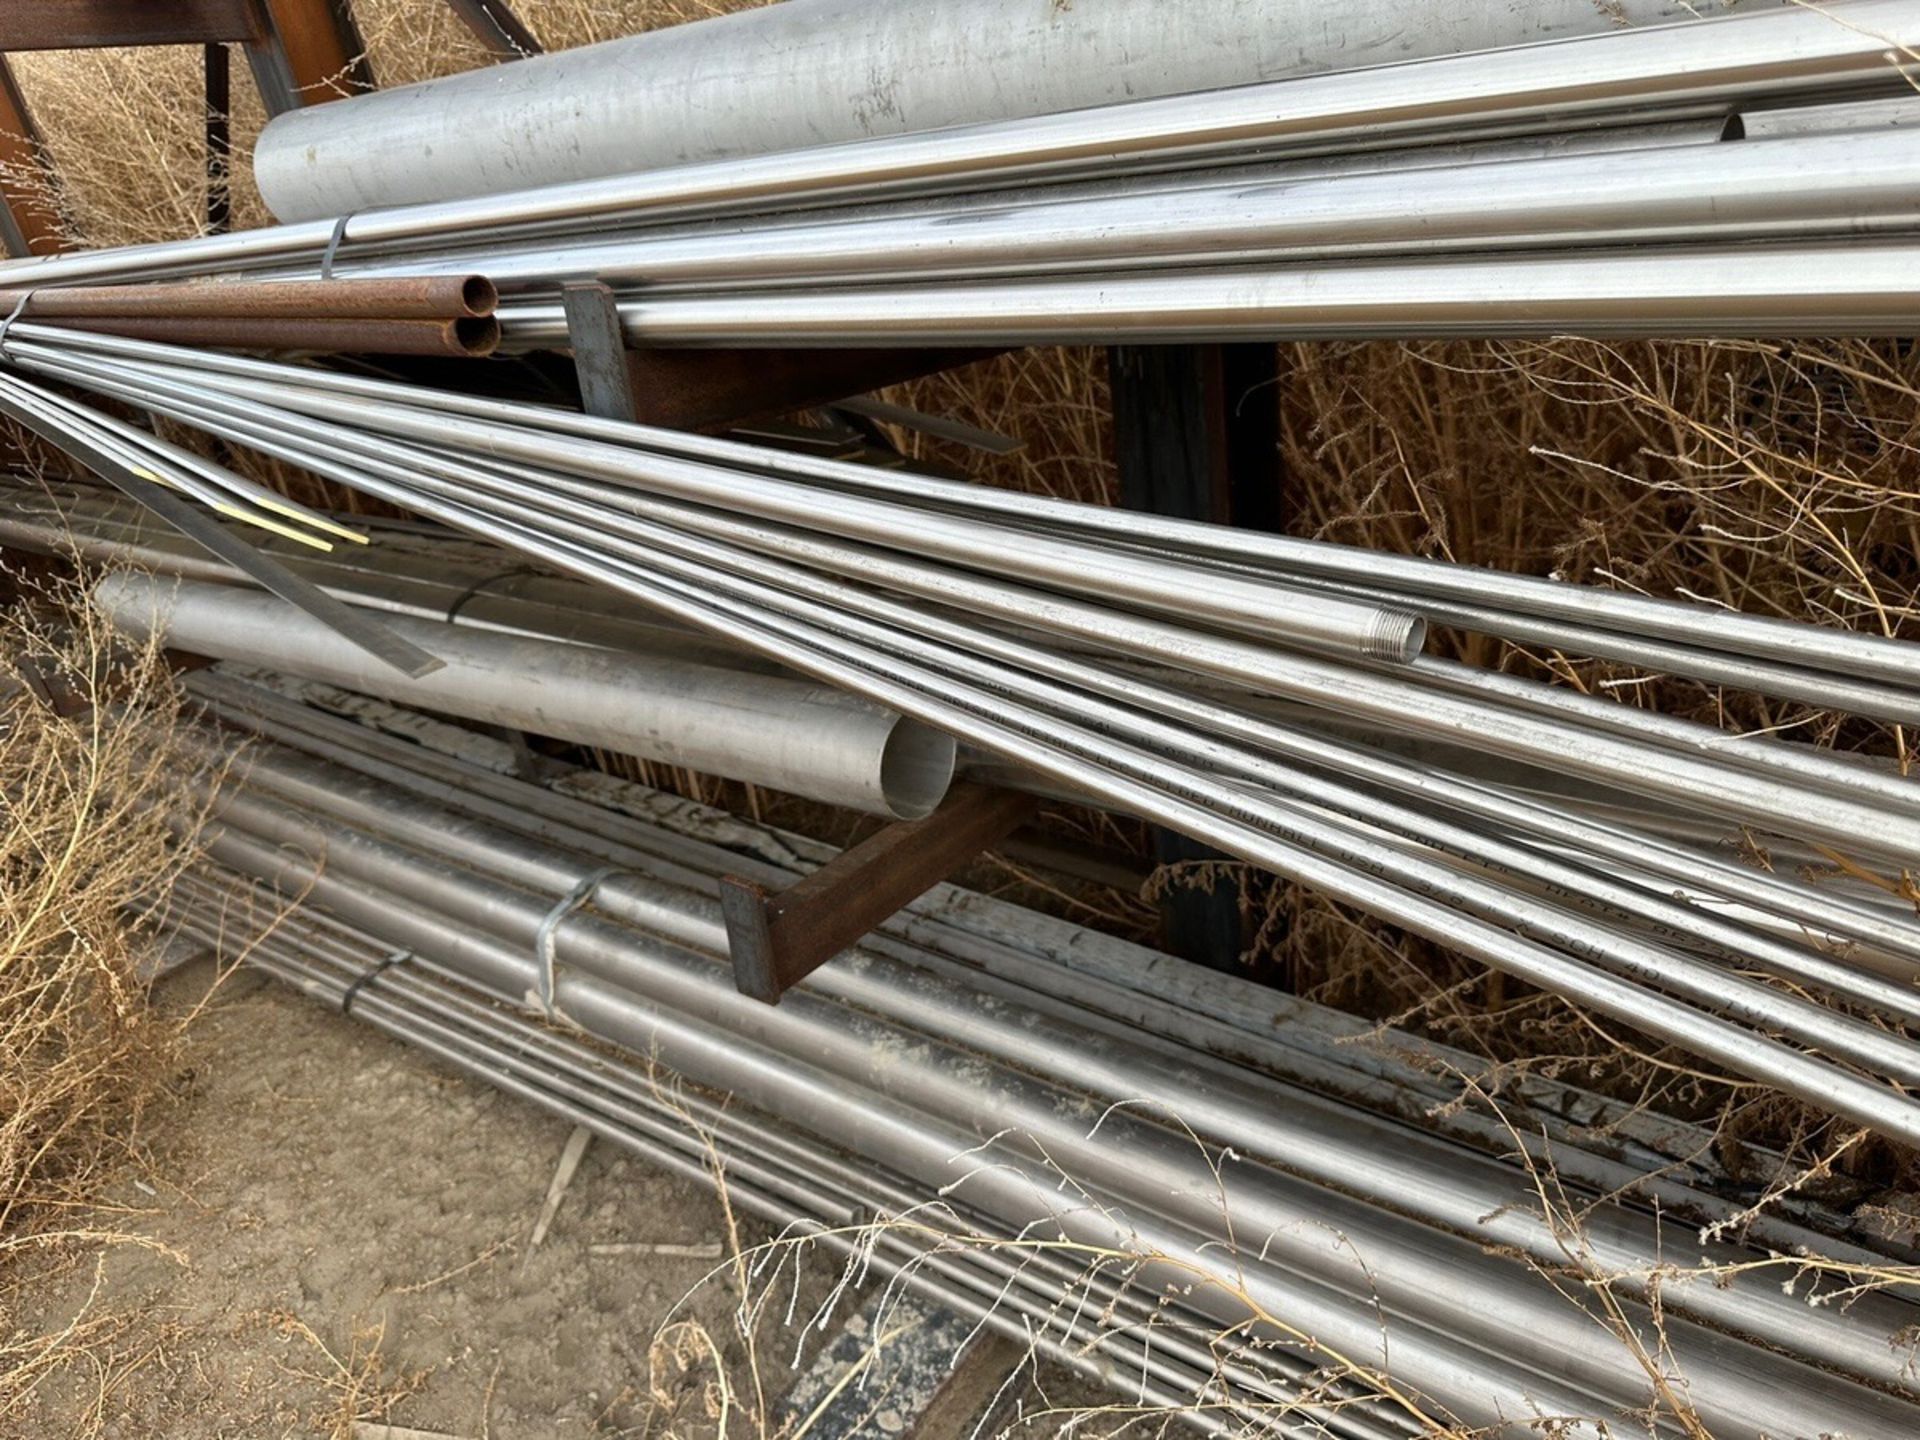 Metal Racks w/ Stainless Steel Stock & Piping, Excludes Lot 678 (See Link) | Rig Fee $1000 - Image 10 of 13